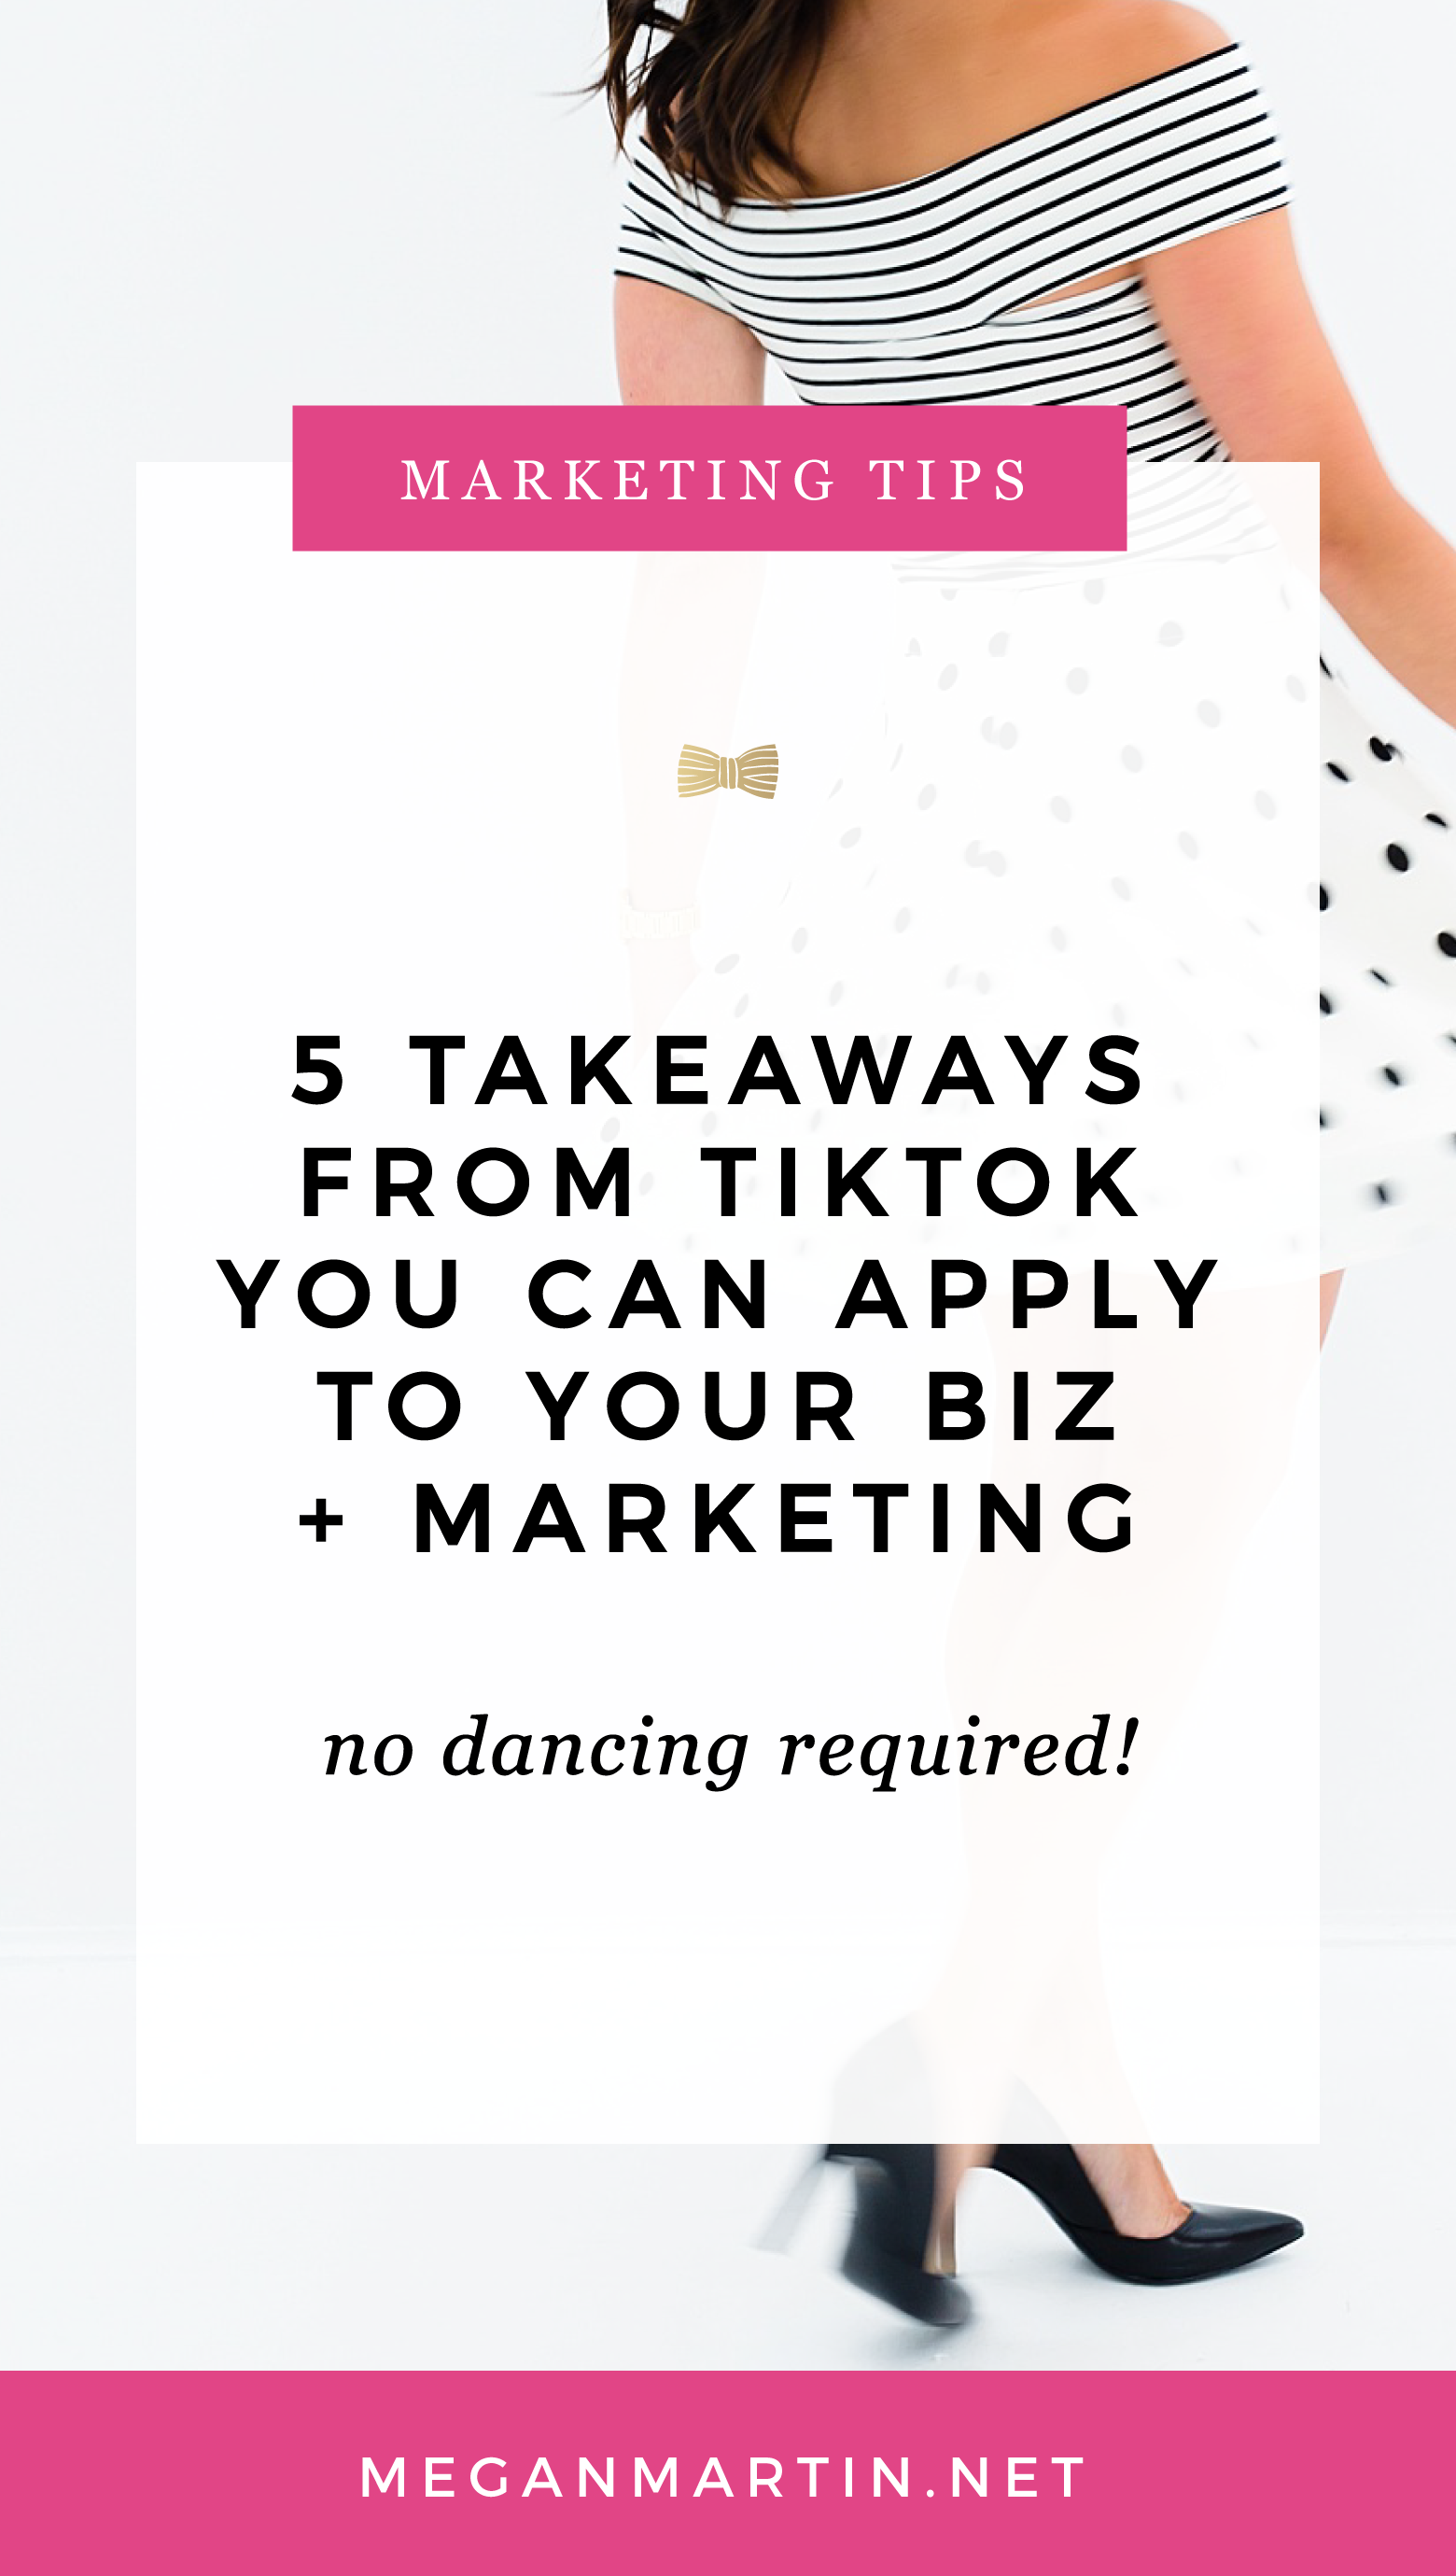 5 Takeaways from TikTok you can apply to your biz + marketing (no dancing required)